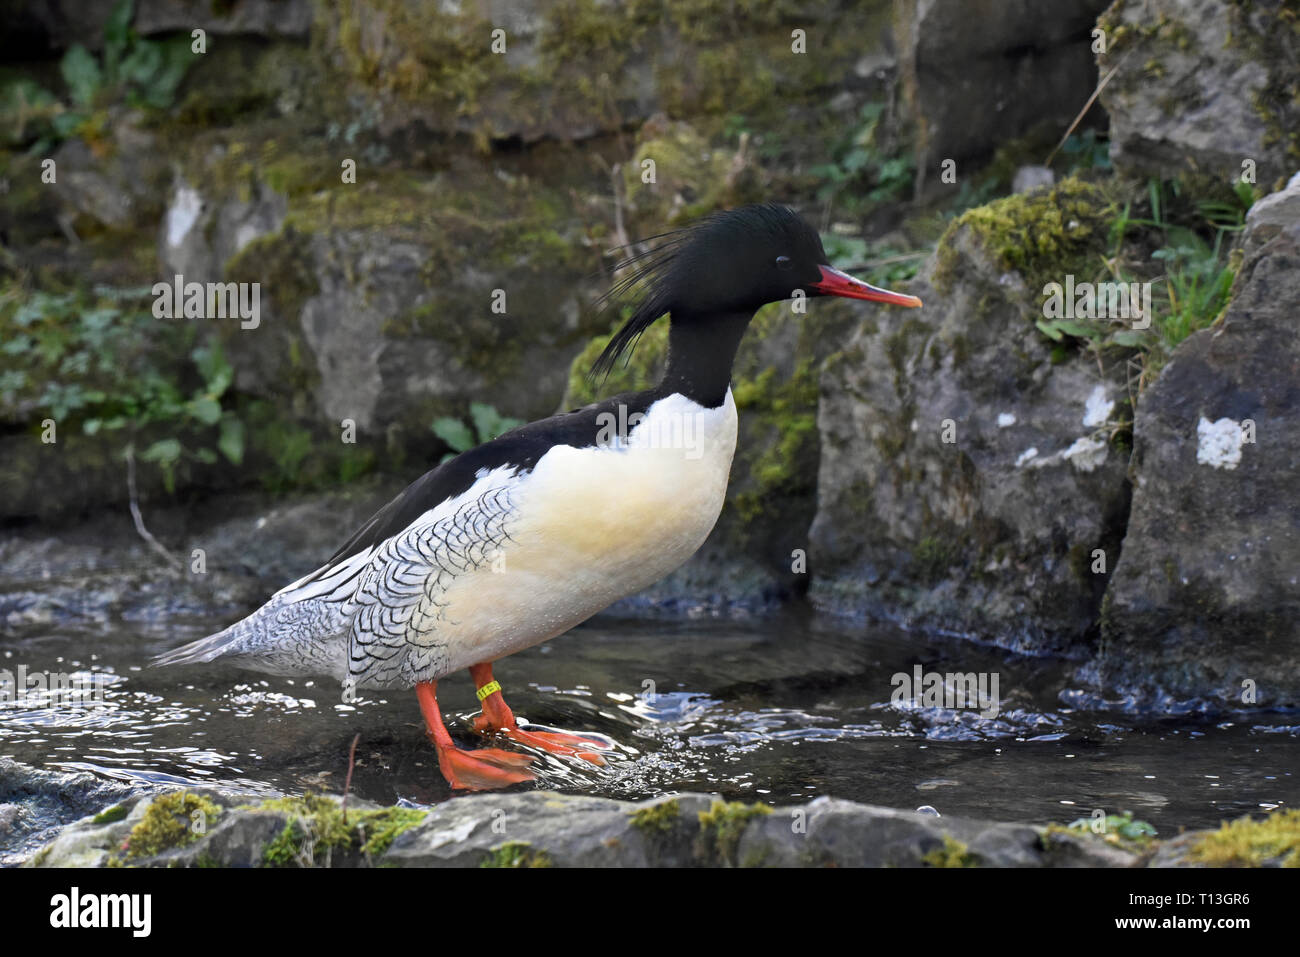 A mature male Scaly-sided Merganser (Mergus squamatus) standing in a small stream in Southern England Stock Photo